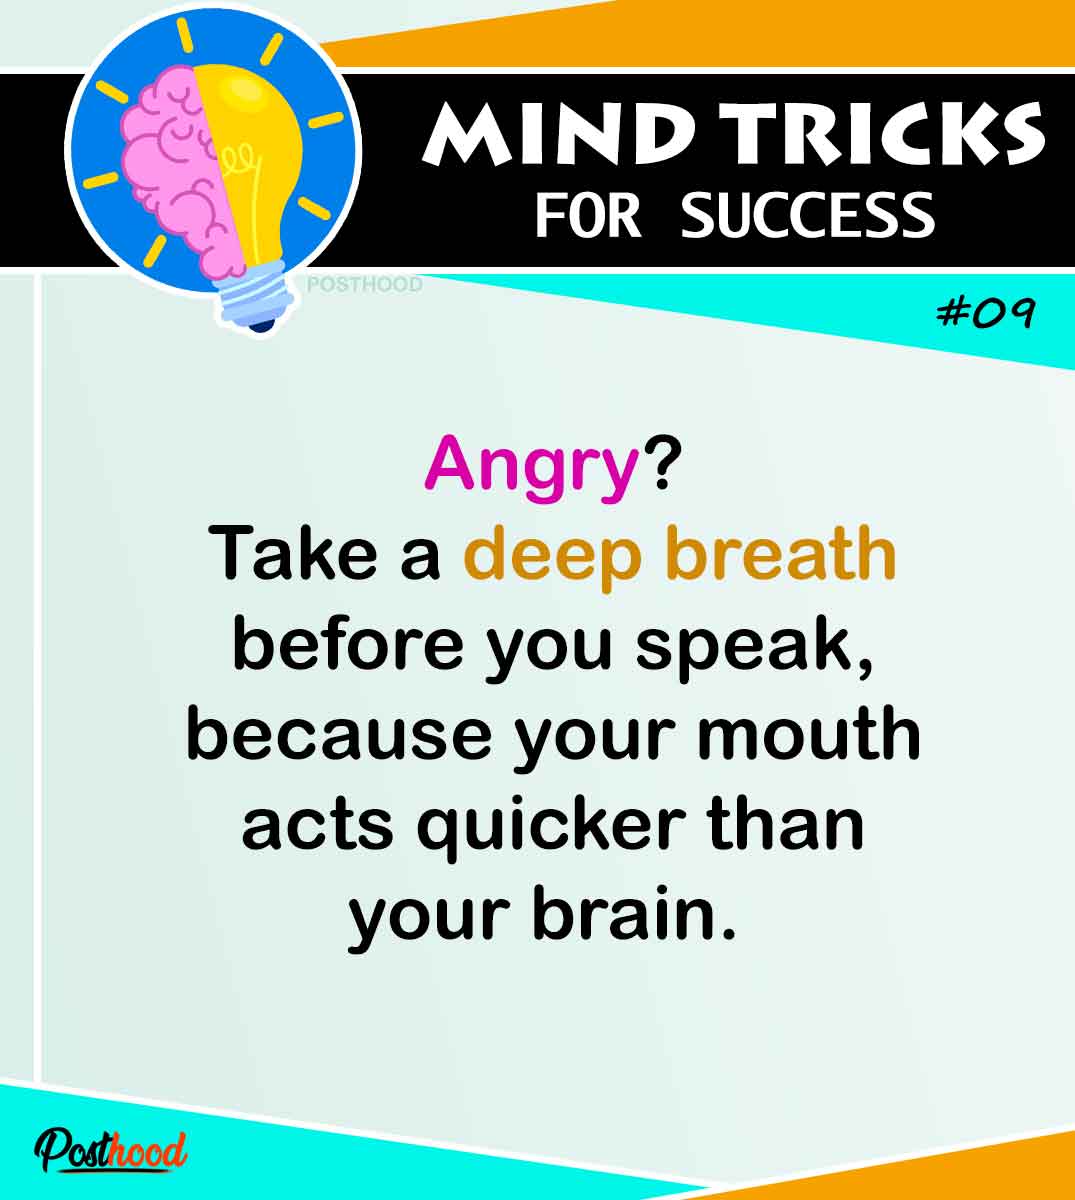 35 psychology tricks to develop the right mindset for success. Train your mind with these amazing mind tricking tools and psychology.